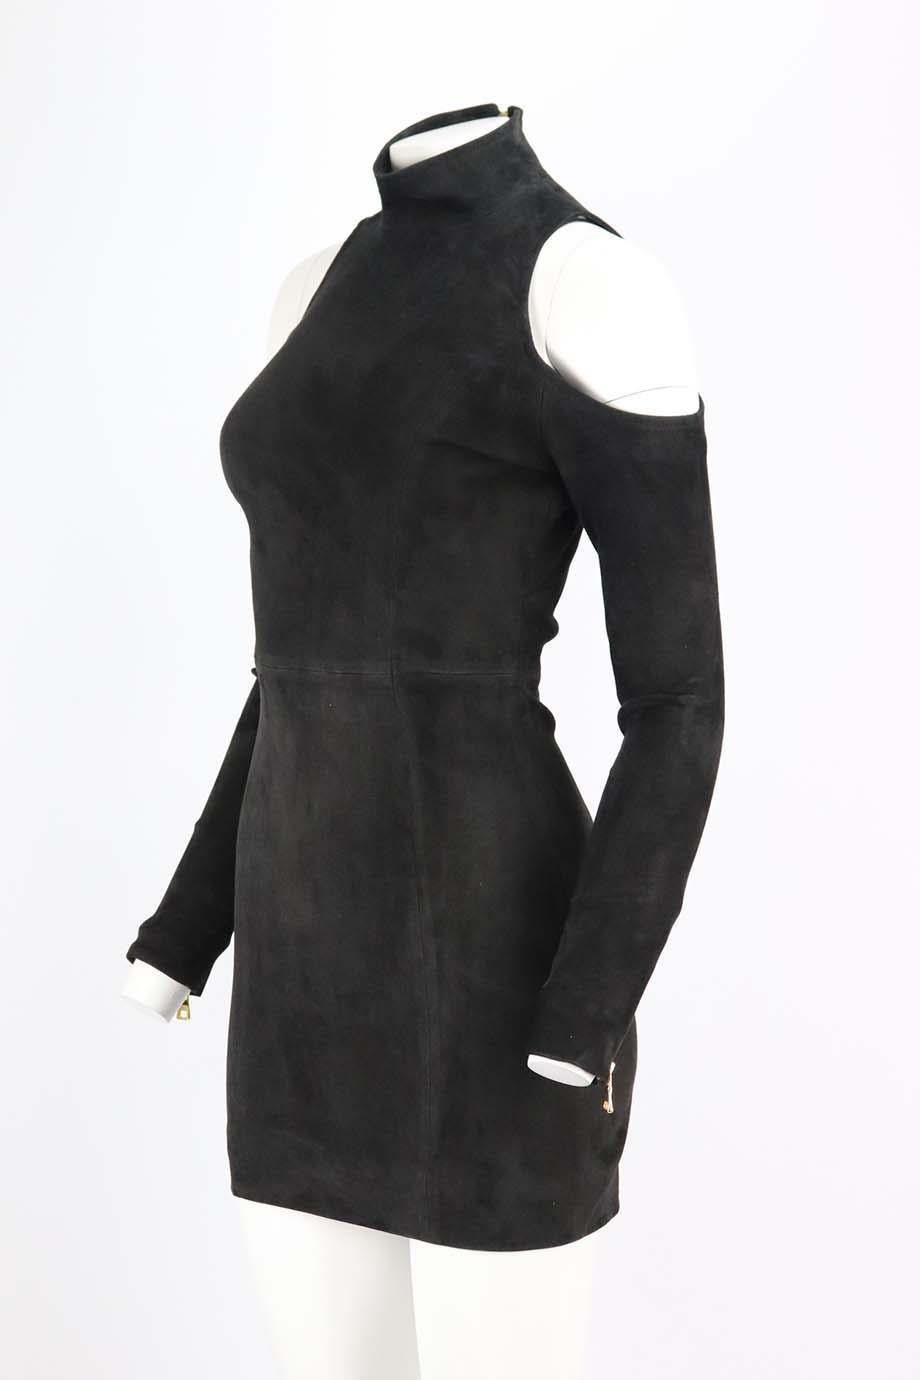 This mini dress by Balmain is made from soft stretch-suede, it is detailed with cutouts at the shoulders which reveals some skin. Black stretch-suede. Zip fastening at back. 100% Lamb skin; lining: 100% silk. Size: FR 36 (UK 8, US 4, IT 40). Bust